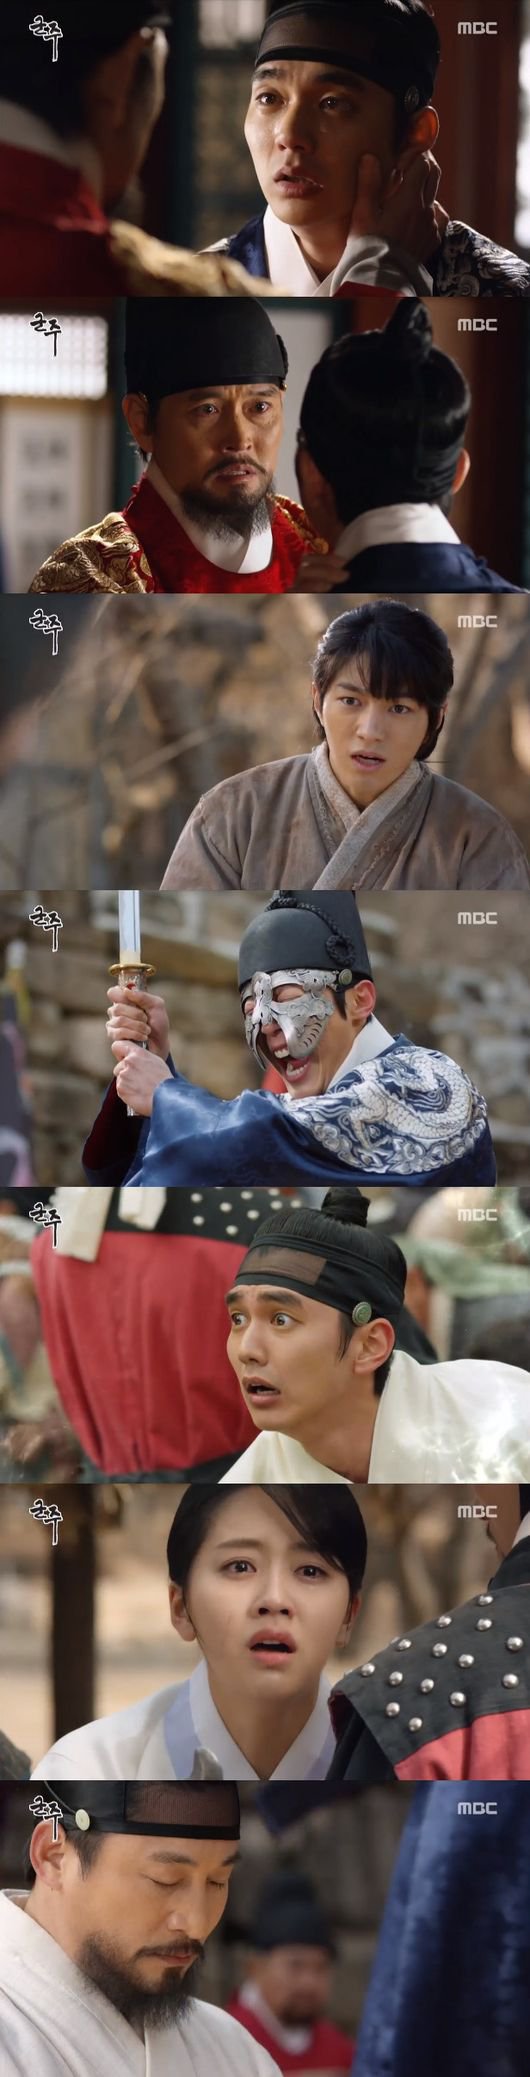 &quot;Ruler: Master of the Mask&quot; Yoo Seung-ho loses loyal subject